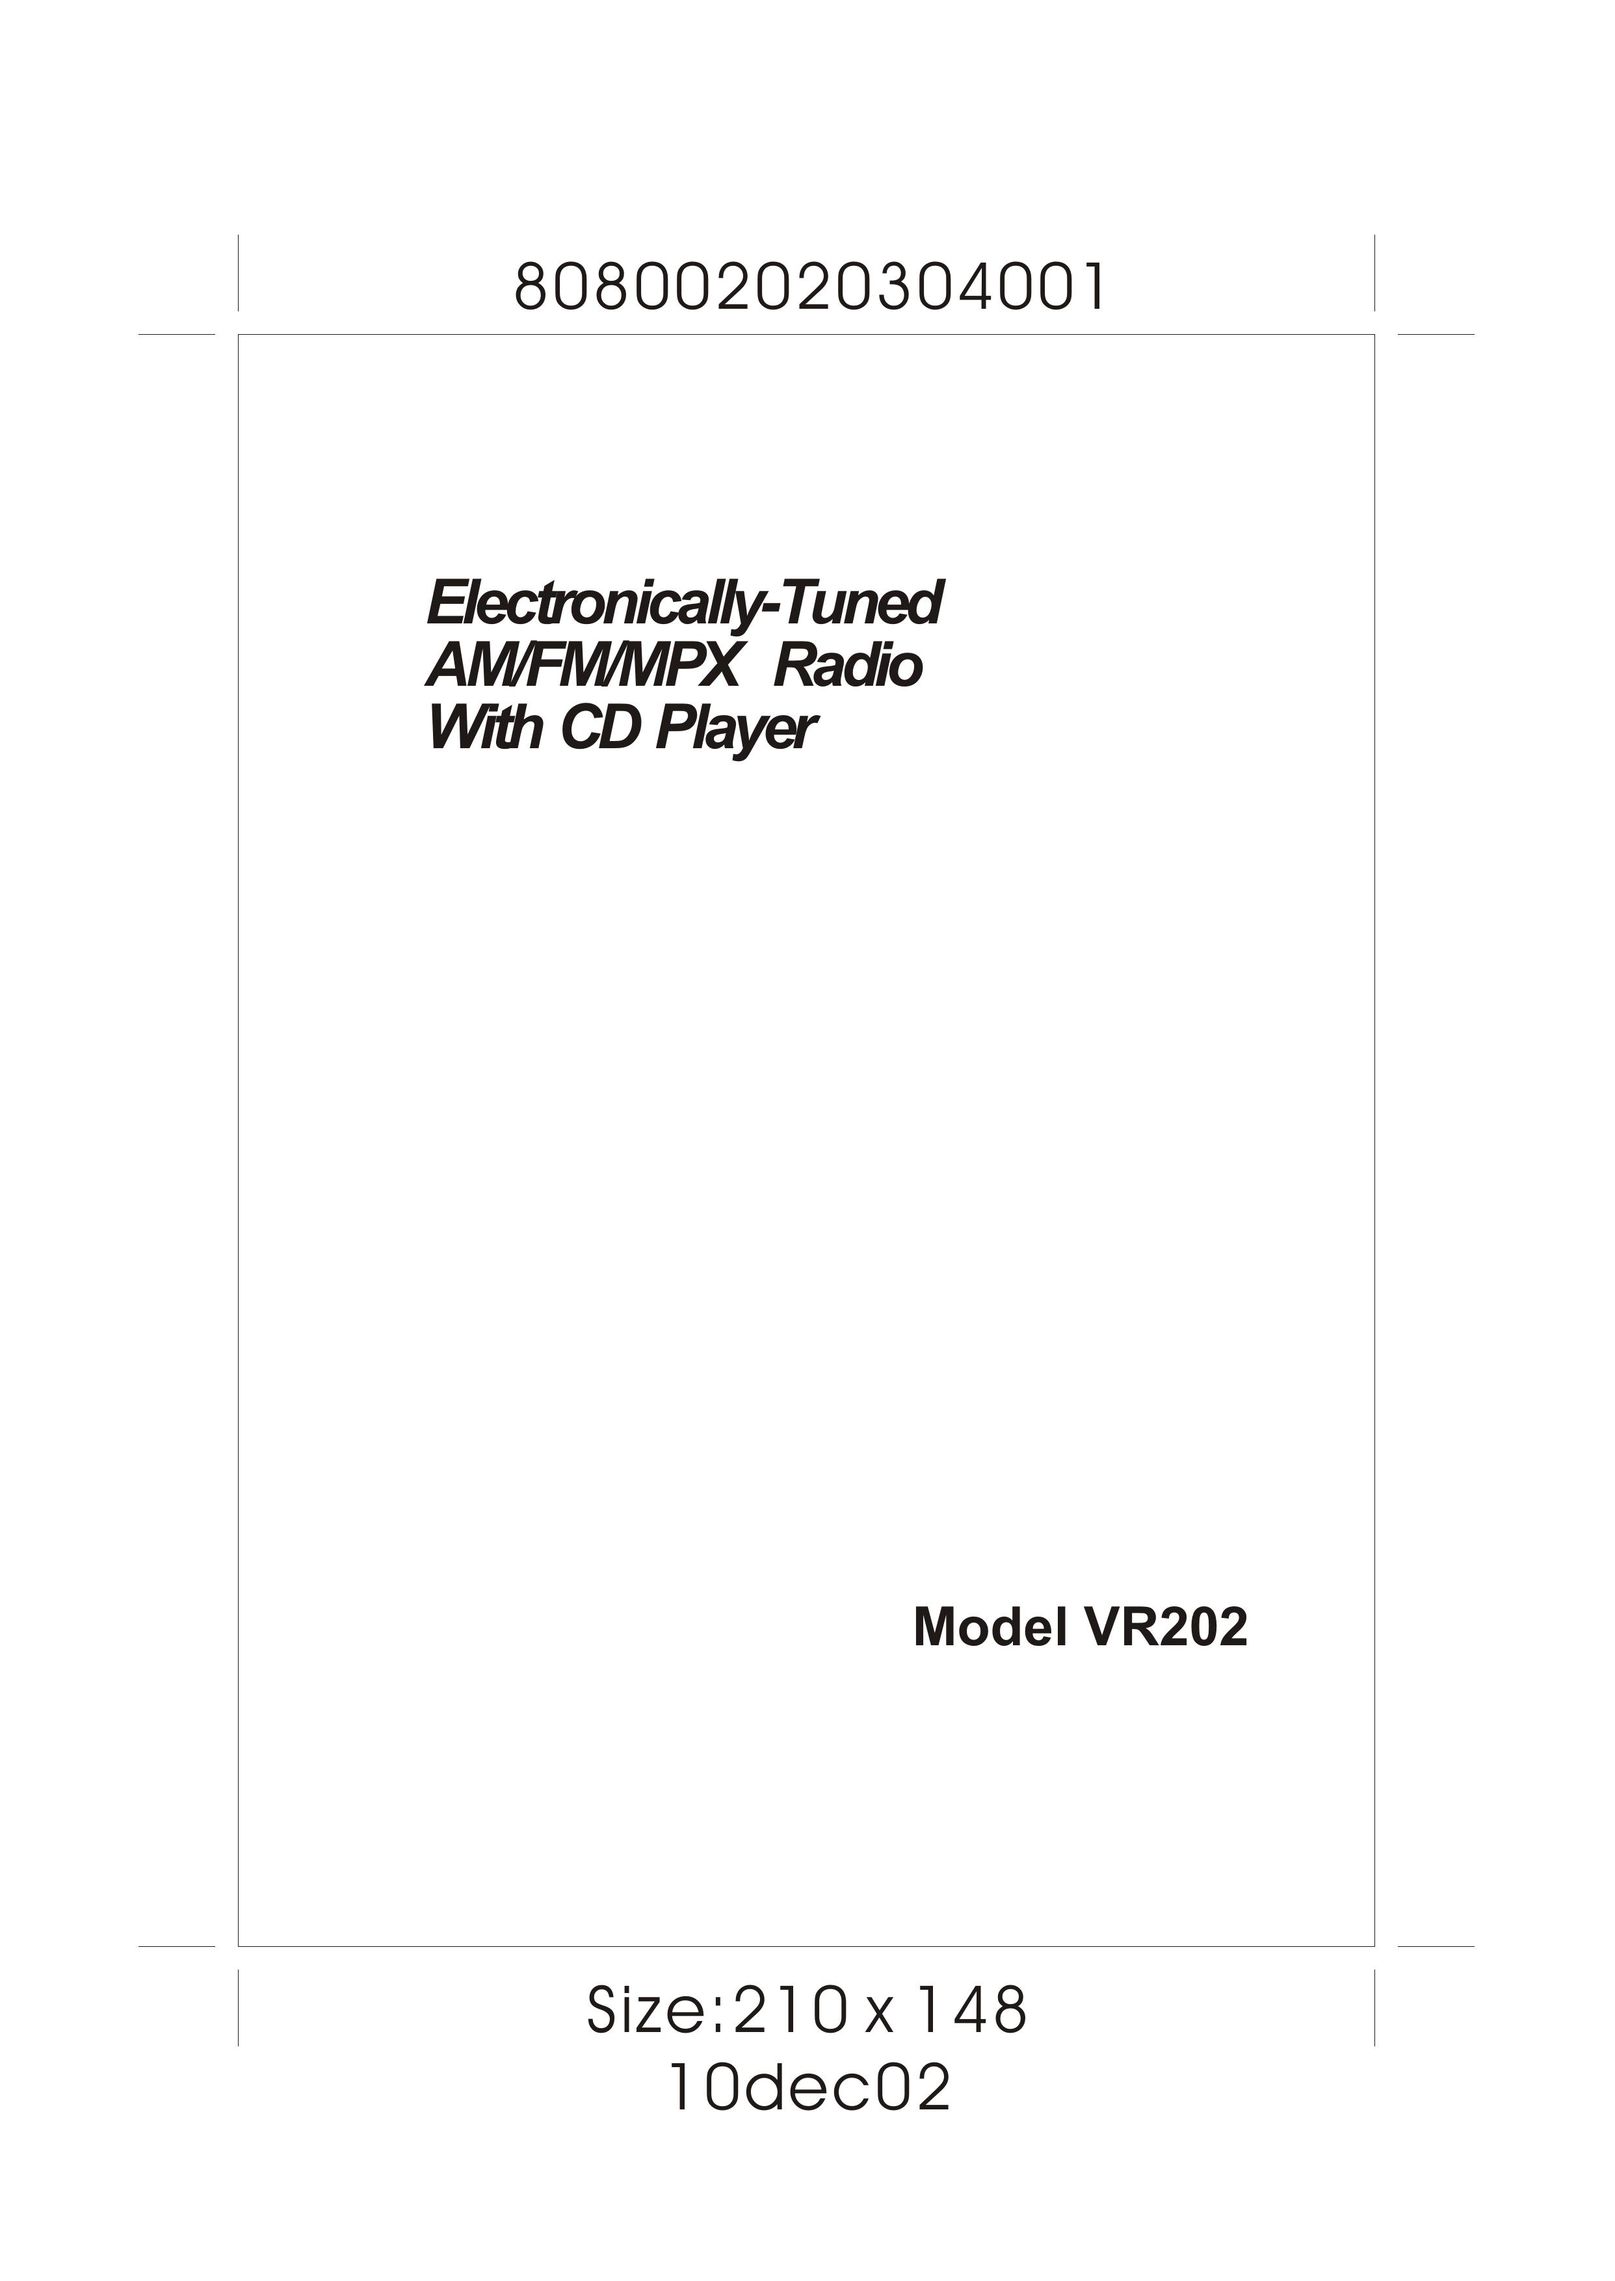 ASA Electronics VR202 Stereo System User Manual